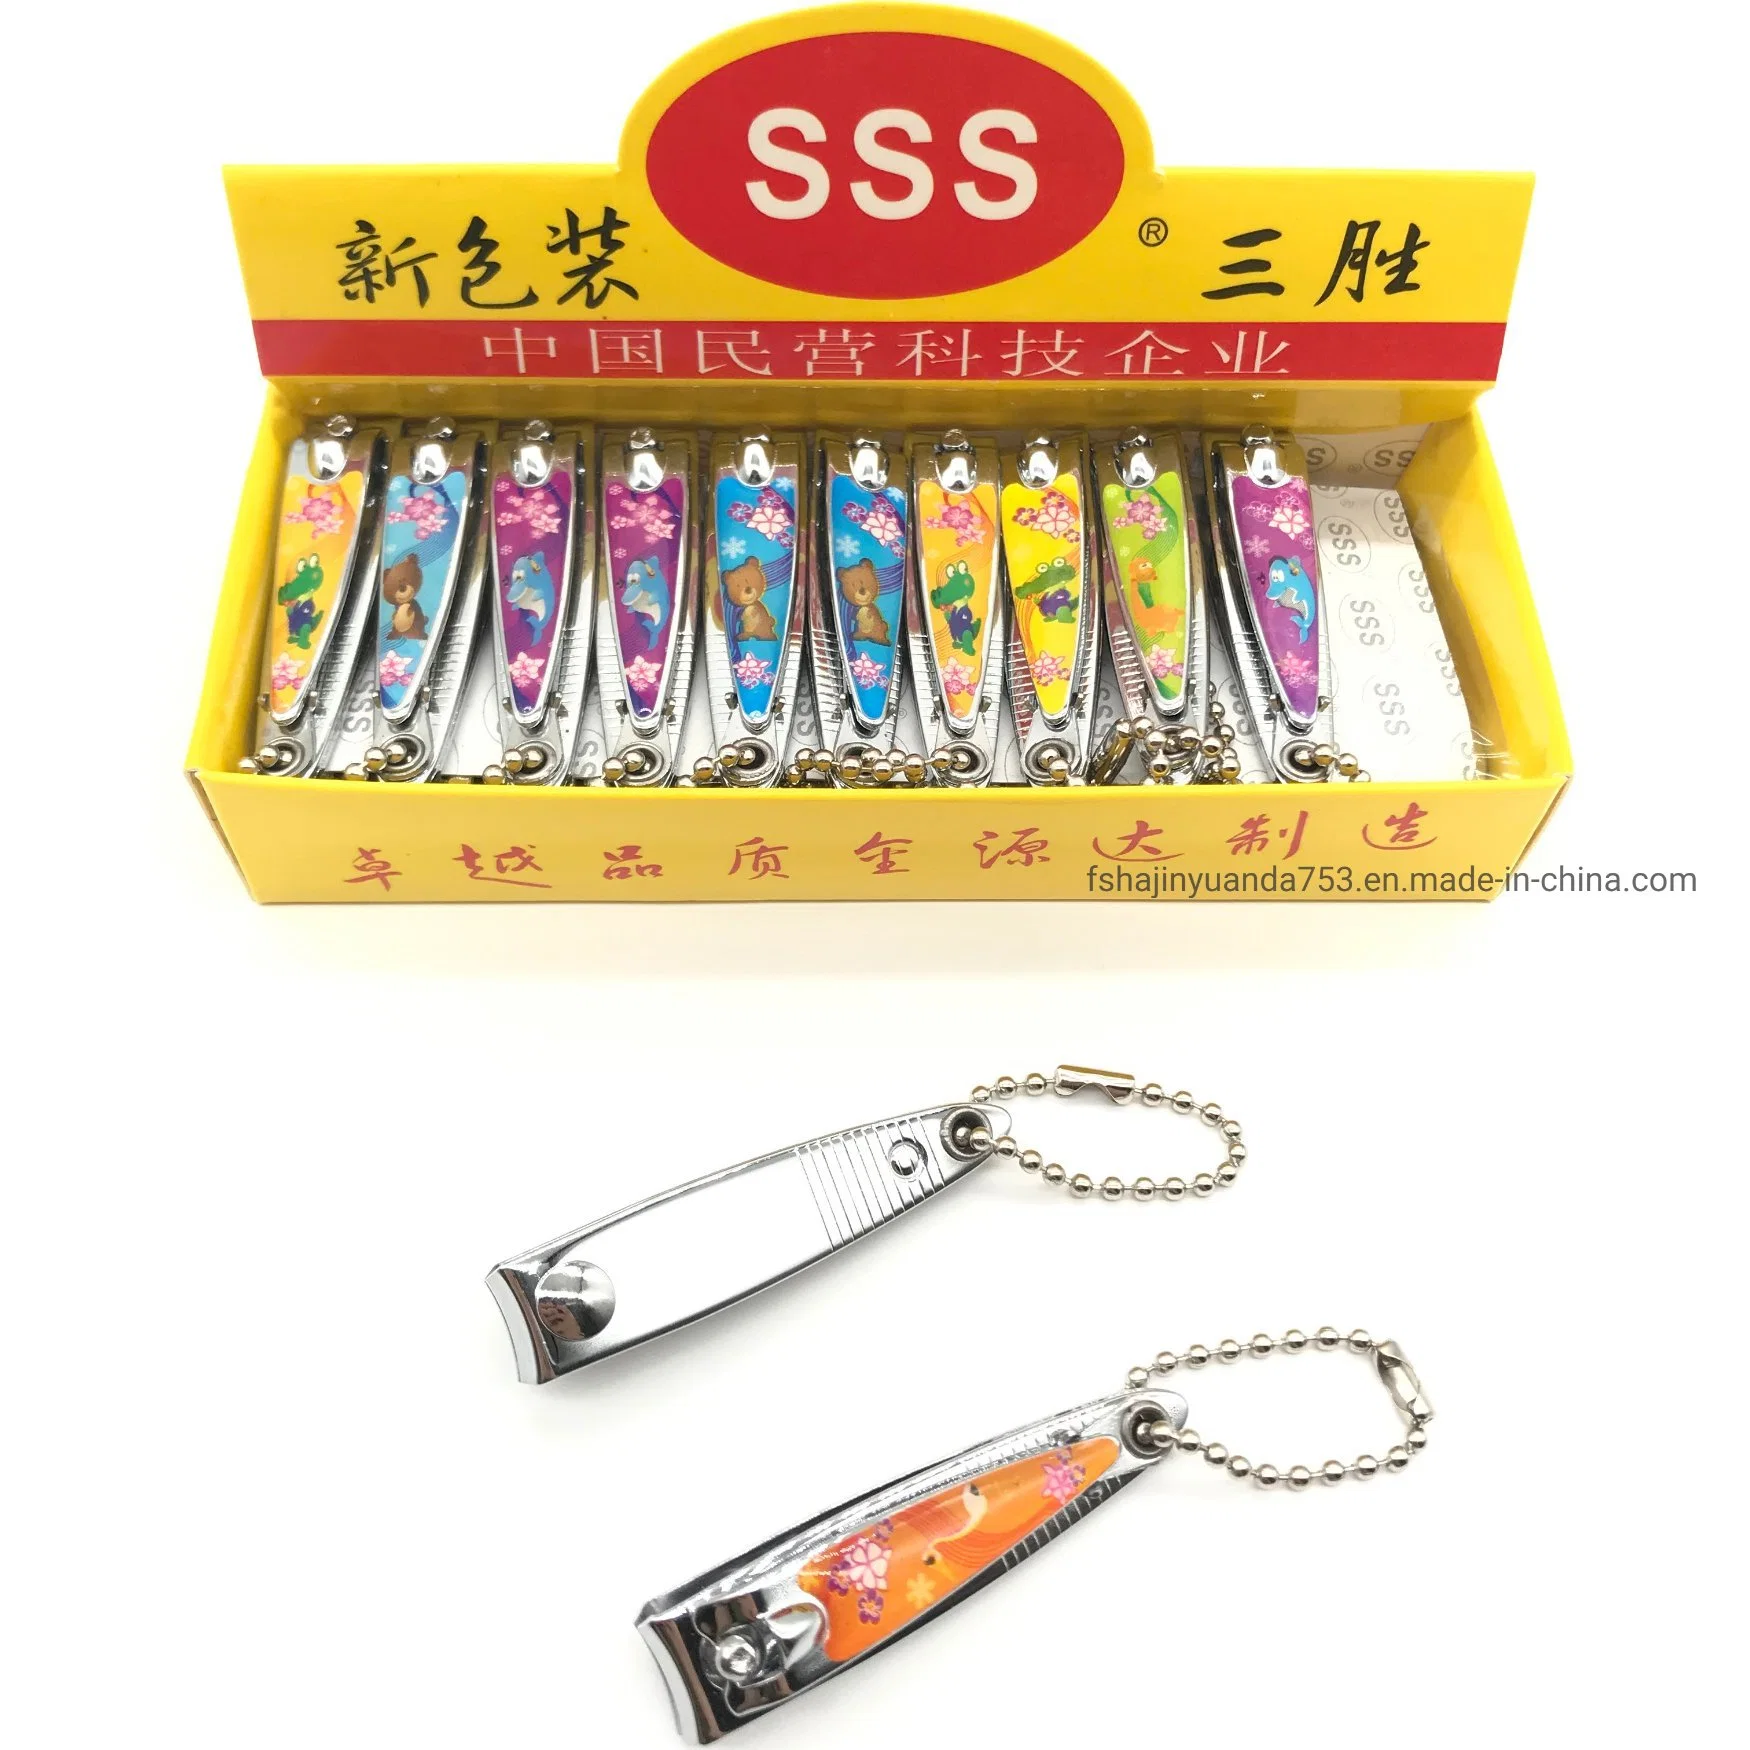 SSS 202 Baby Nail Clippers with File Nail Clippers with قصاصات السلسلة الحلزونيّة